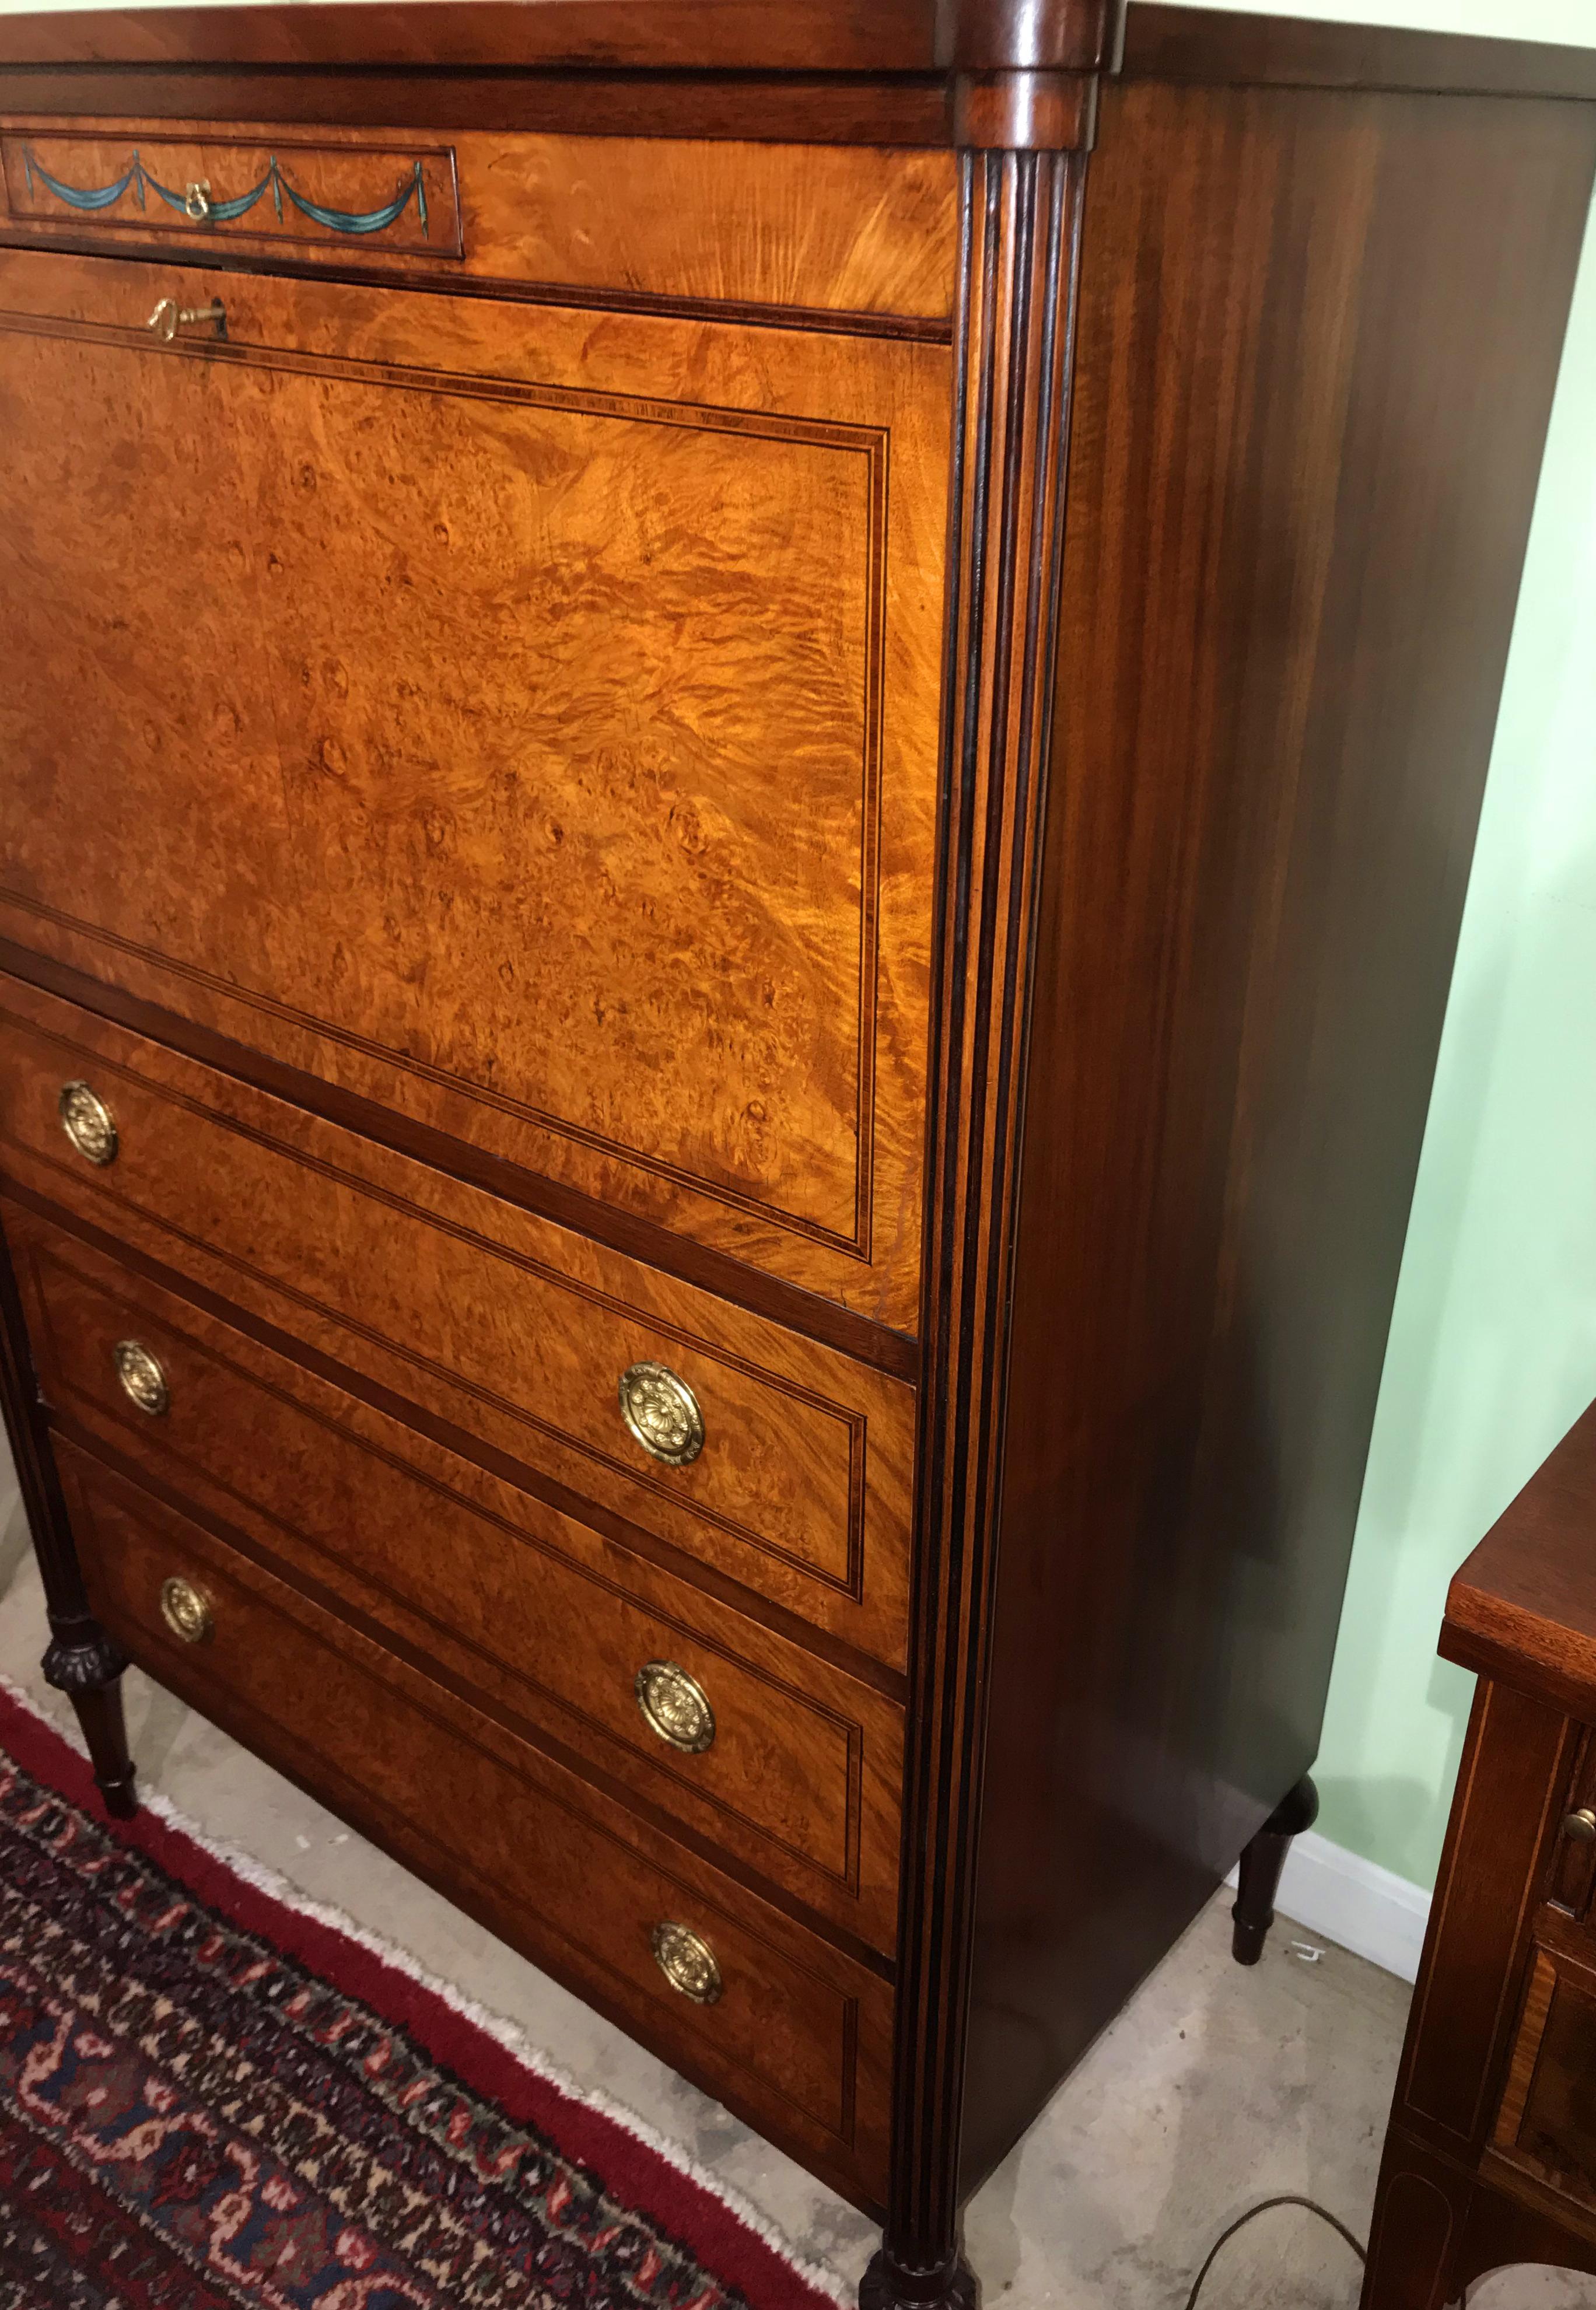 A fine custom gentleman’s tall chest in burled walnut veneer by Joseph Gerte, Boston. Drop down front, corner reeded columns, and finely carved legs. Dates to the mid-20th century in very good overall condition, with minor imperfections and light